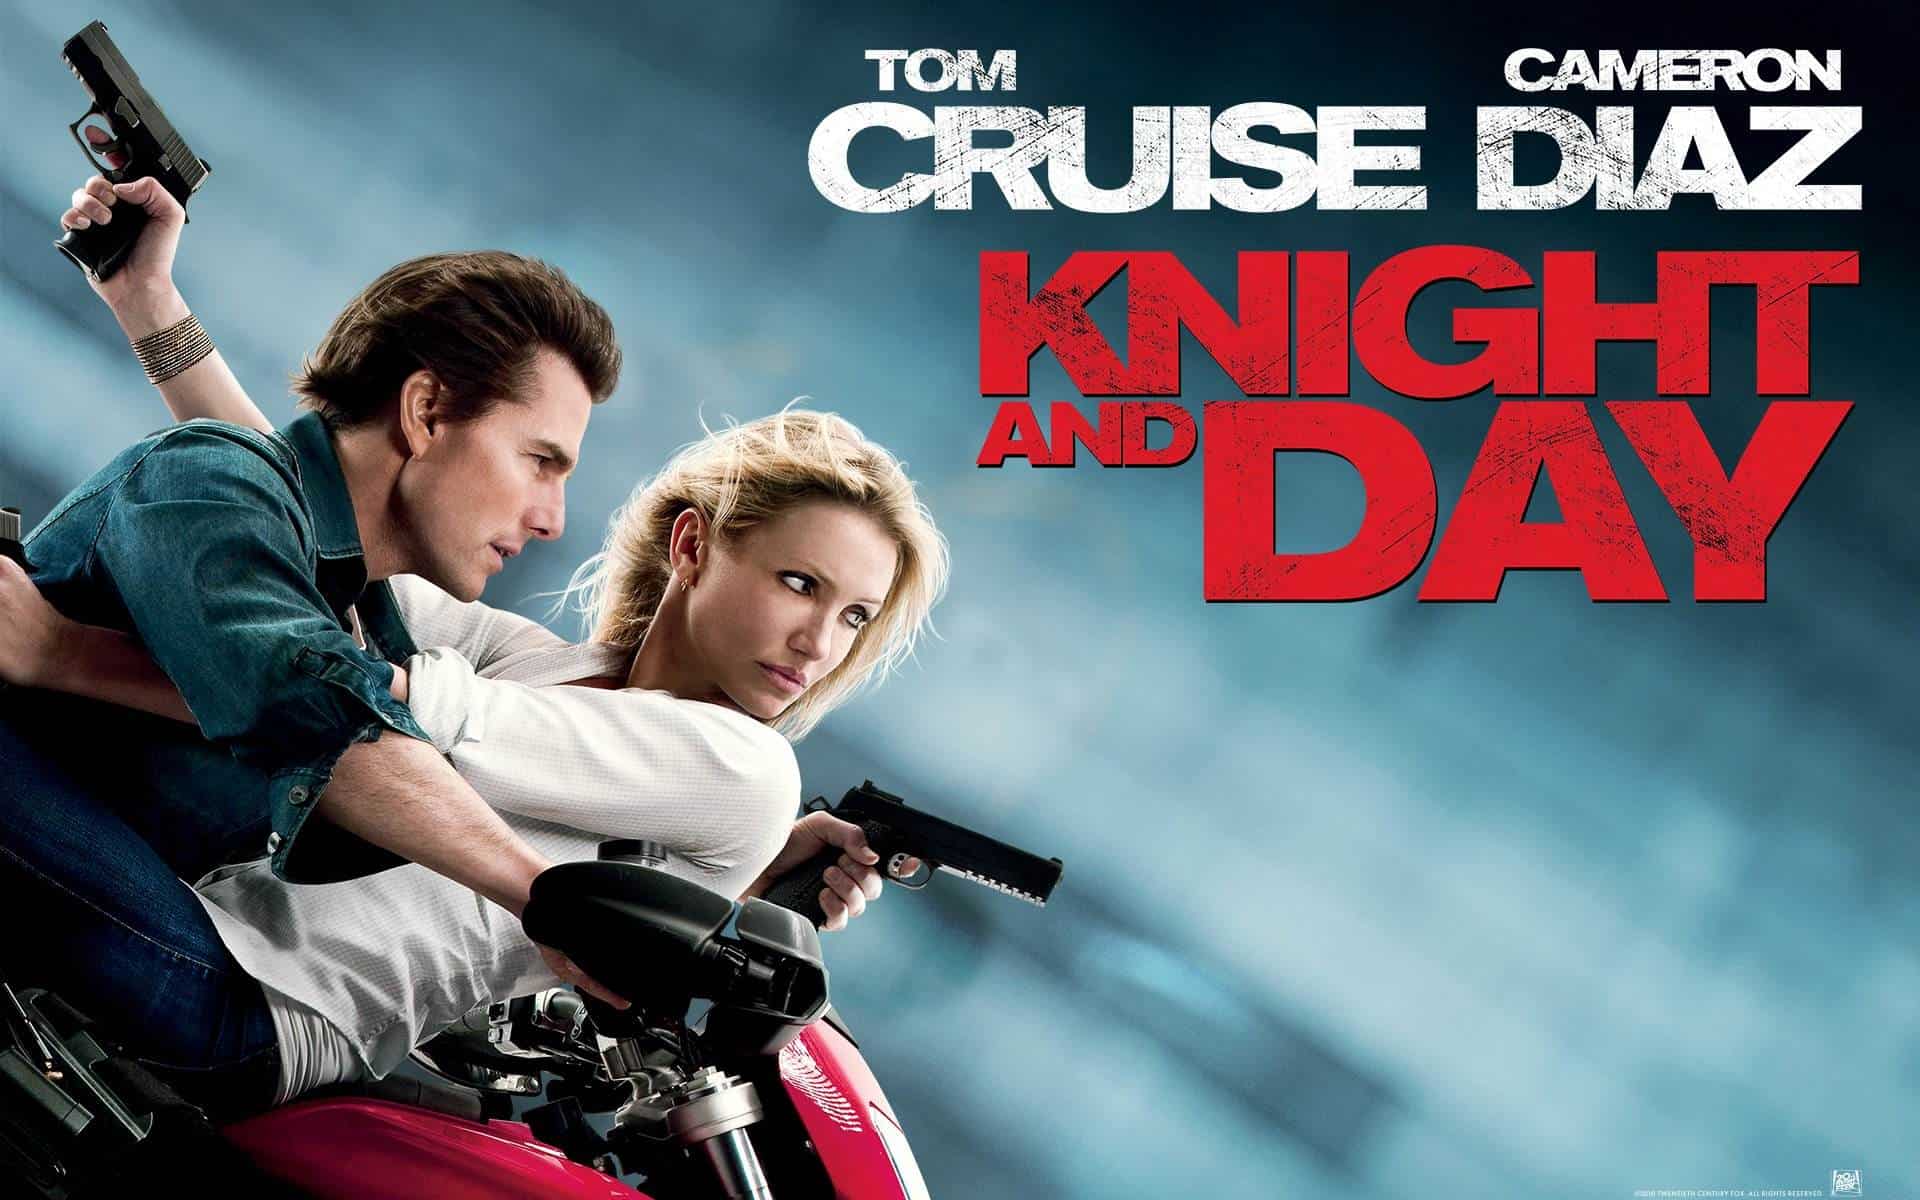 Knight and Day (2010) Bluray Google Drive Download